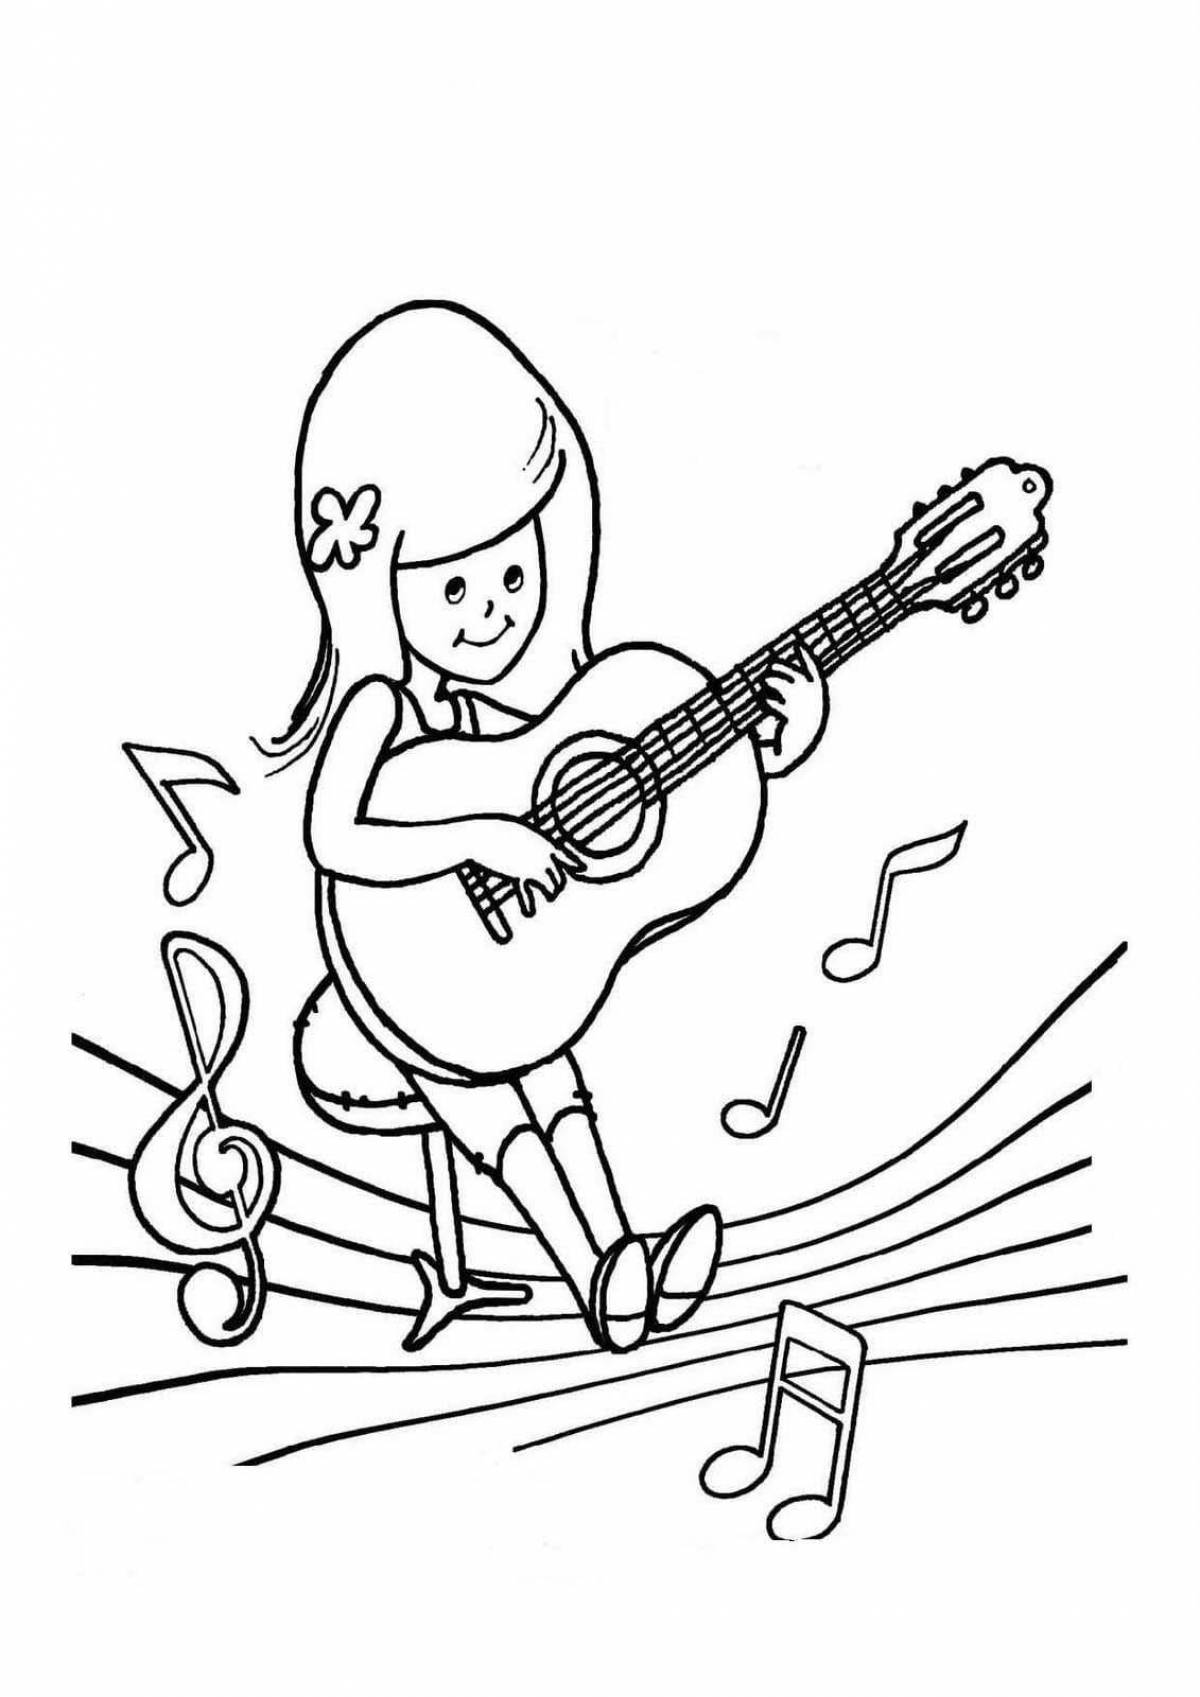 Exciting musical coloring book